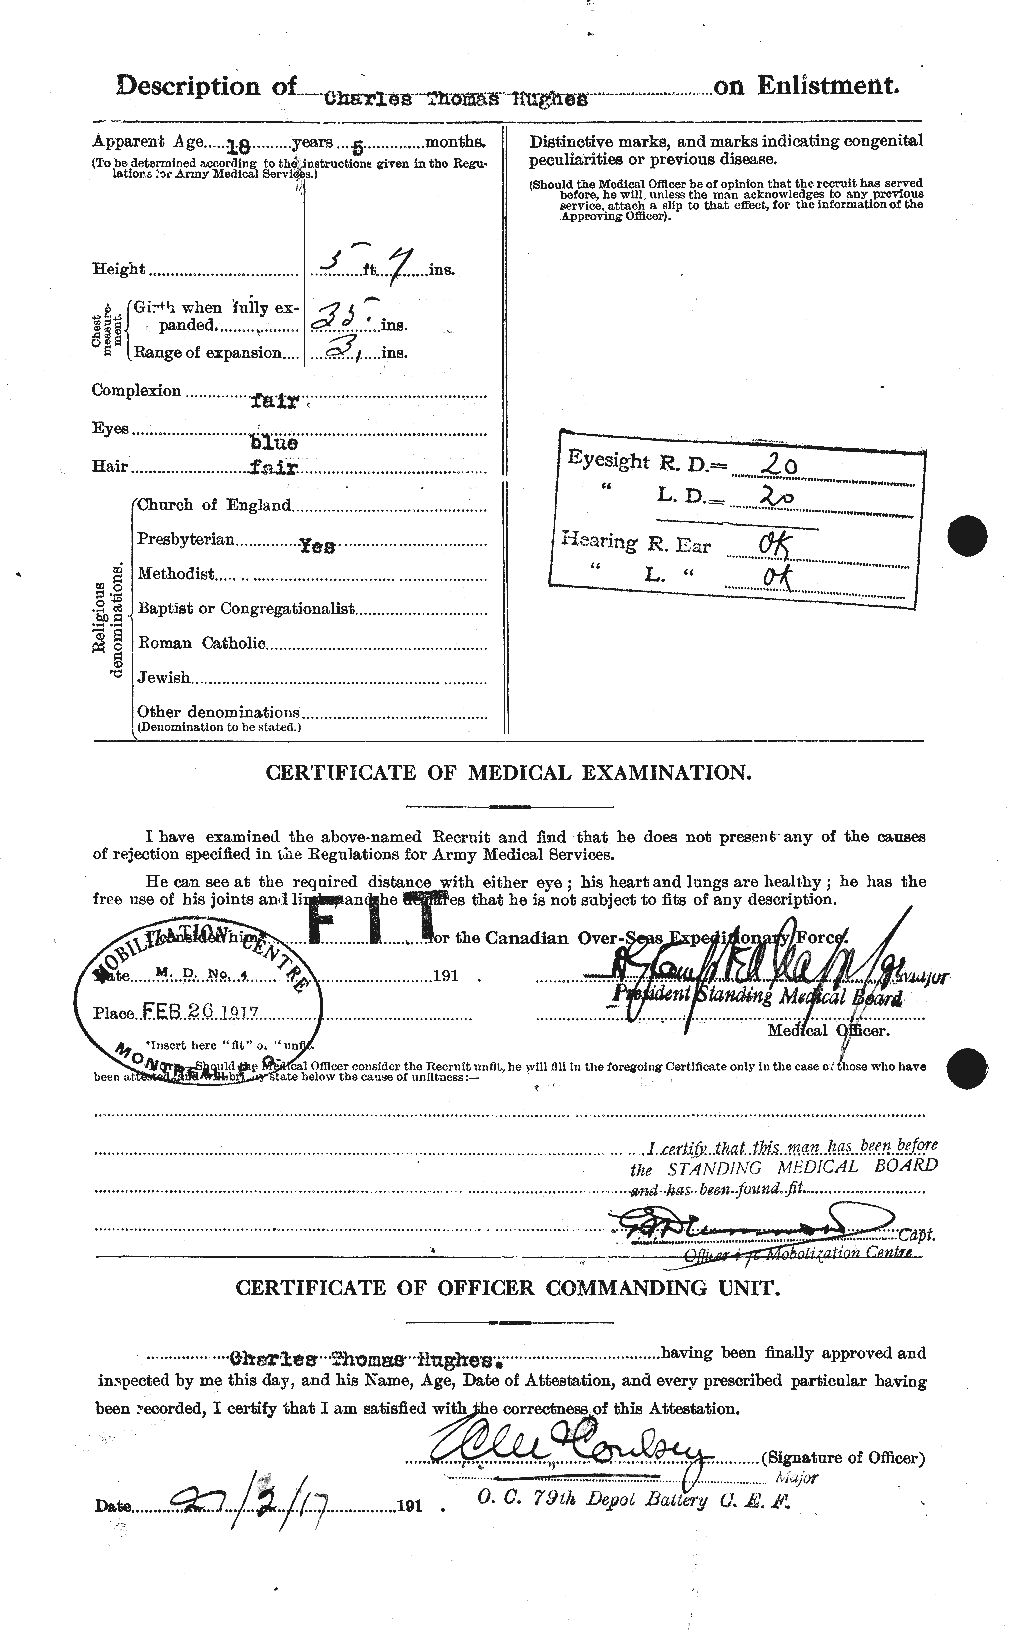 Personnel Records of the First World War - CEF 402614b